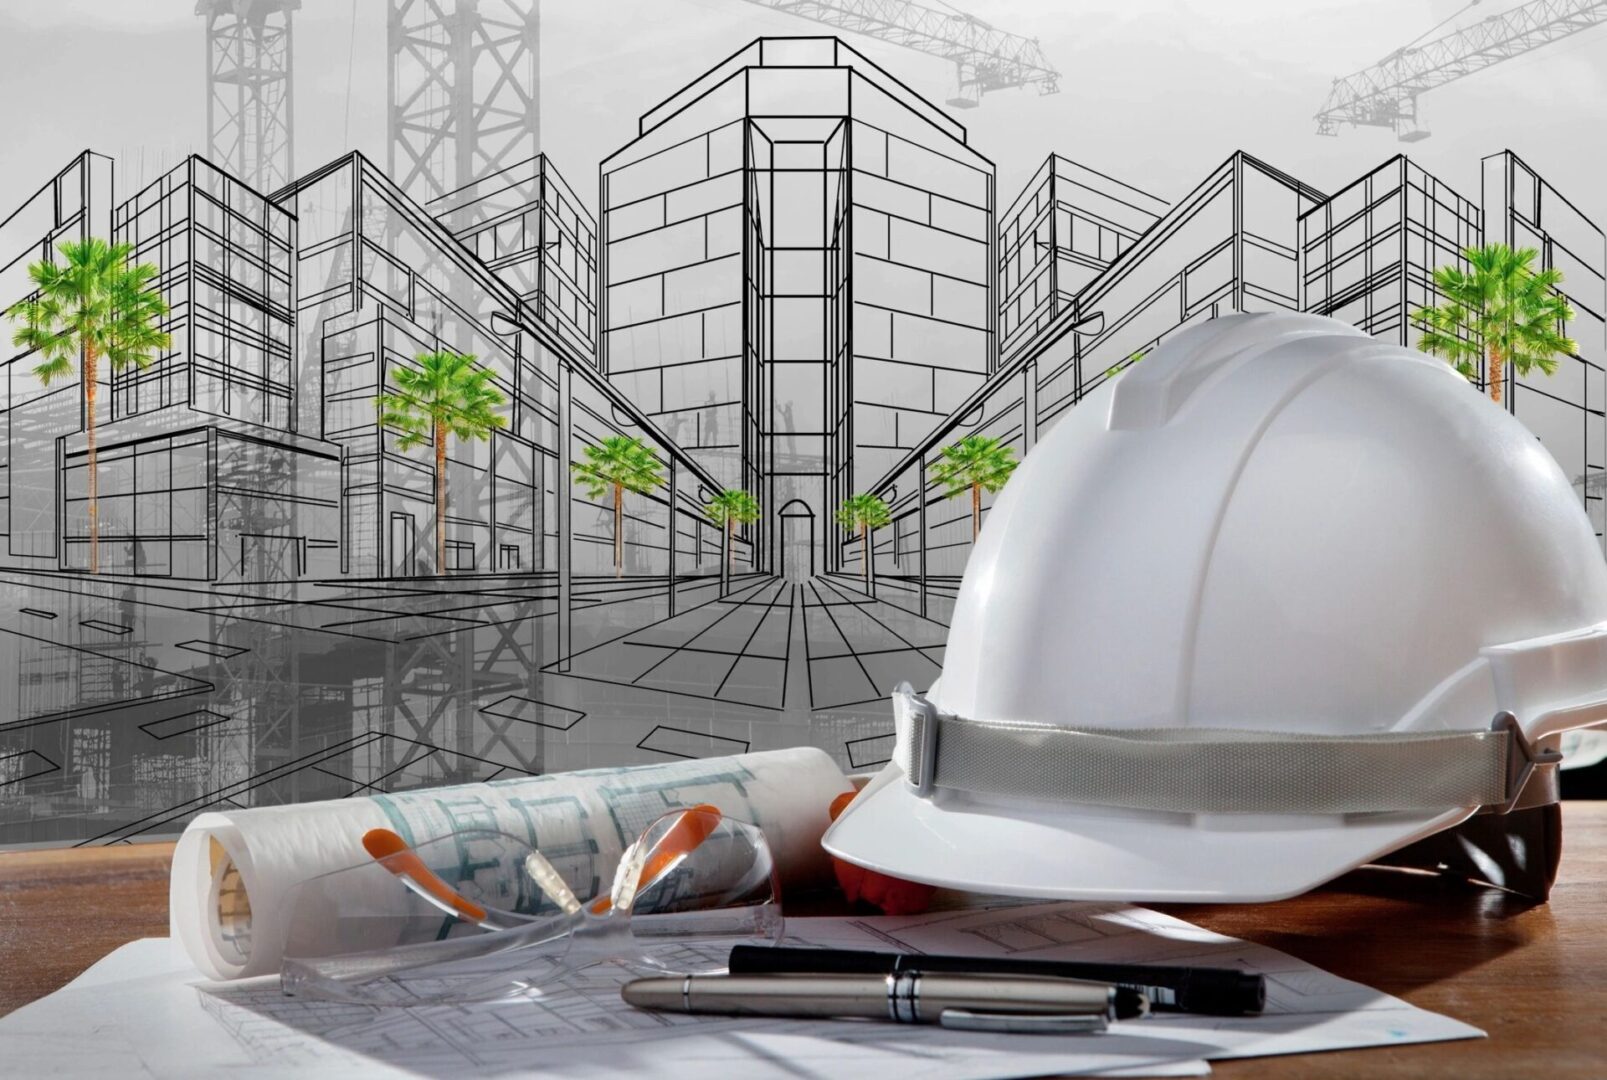 Conceptual image of urban architectural planning with blueprints, hardhat, and drawing tools, superimposed on a sketched cityscape background.